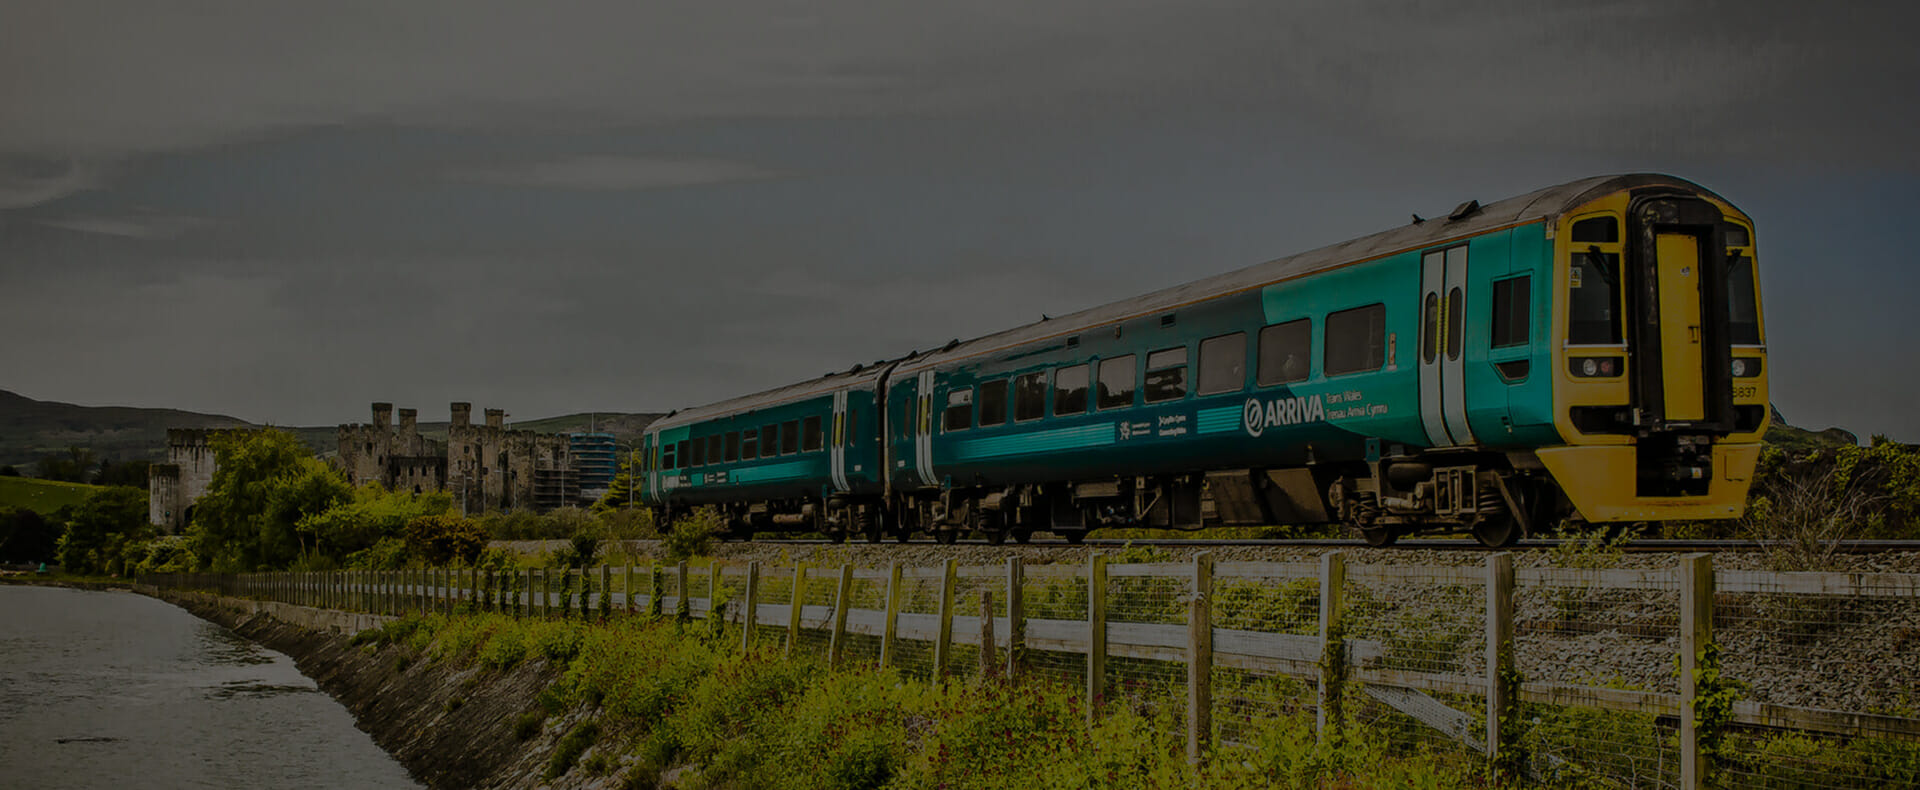 arriva trains wales green and yellow train travelling between stations in country side with castle in the background and fencing alongside